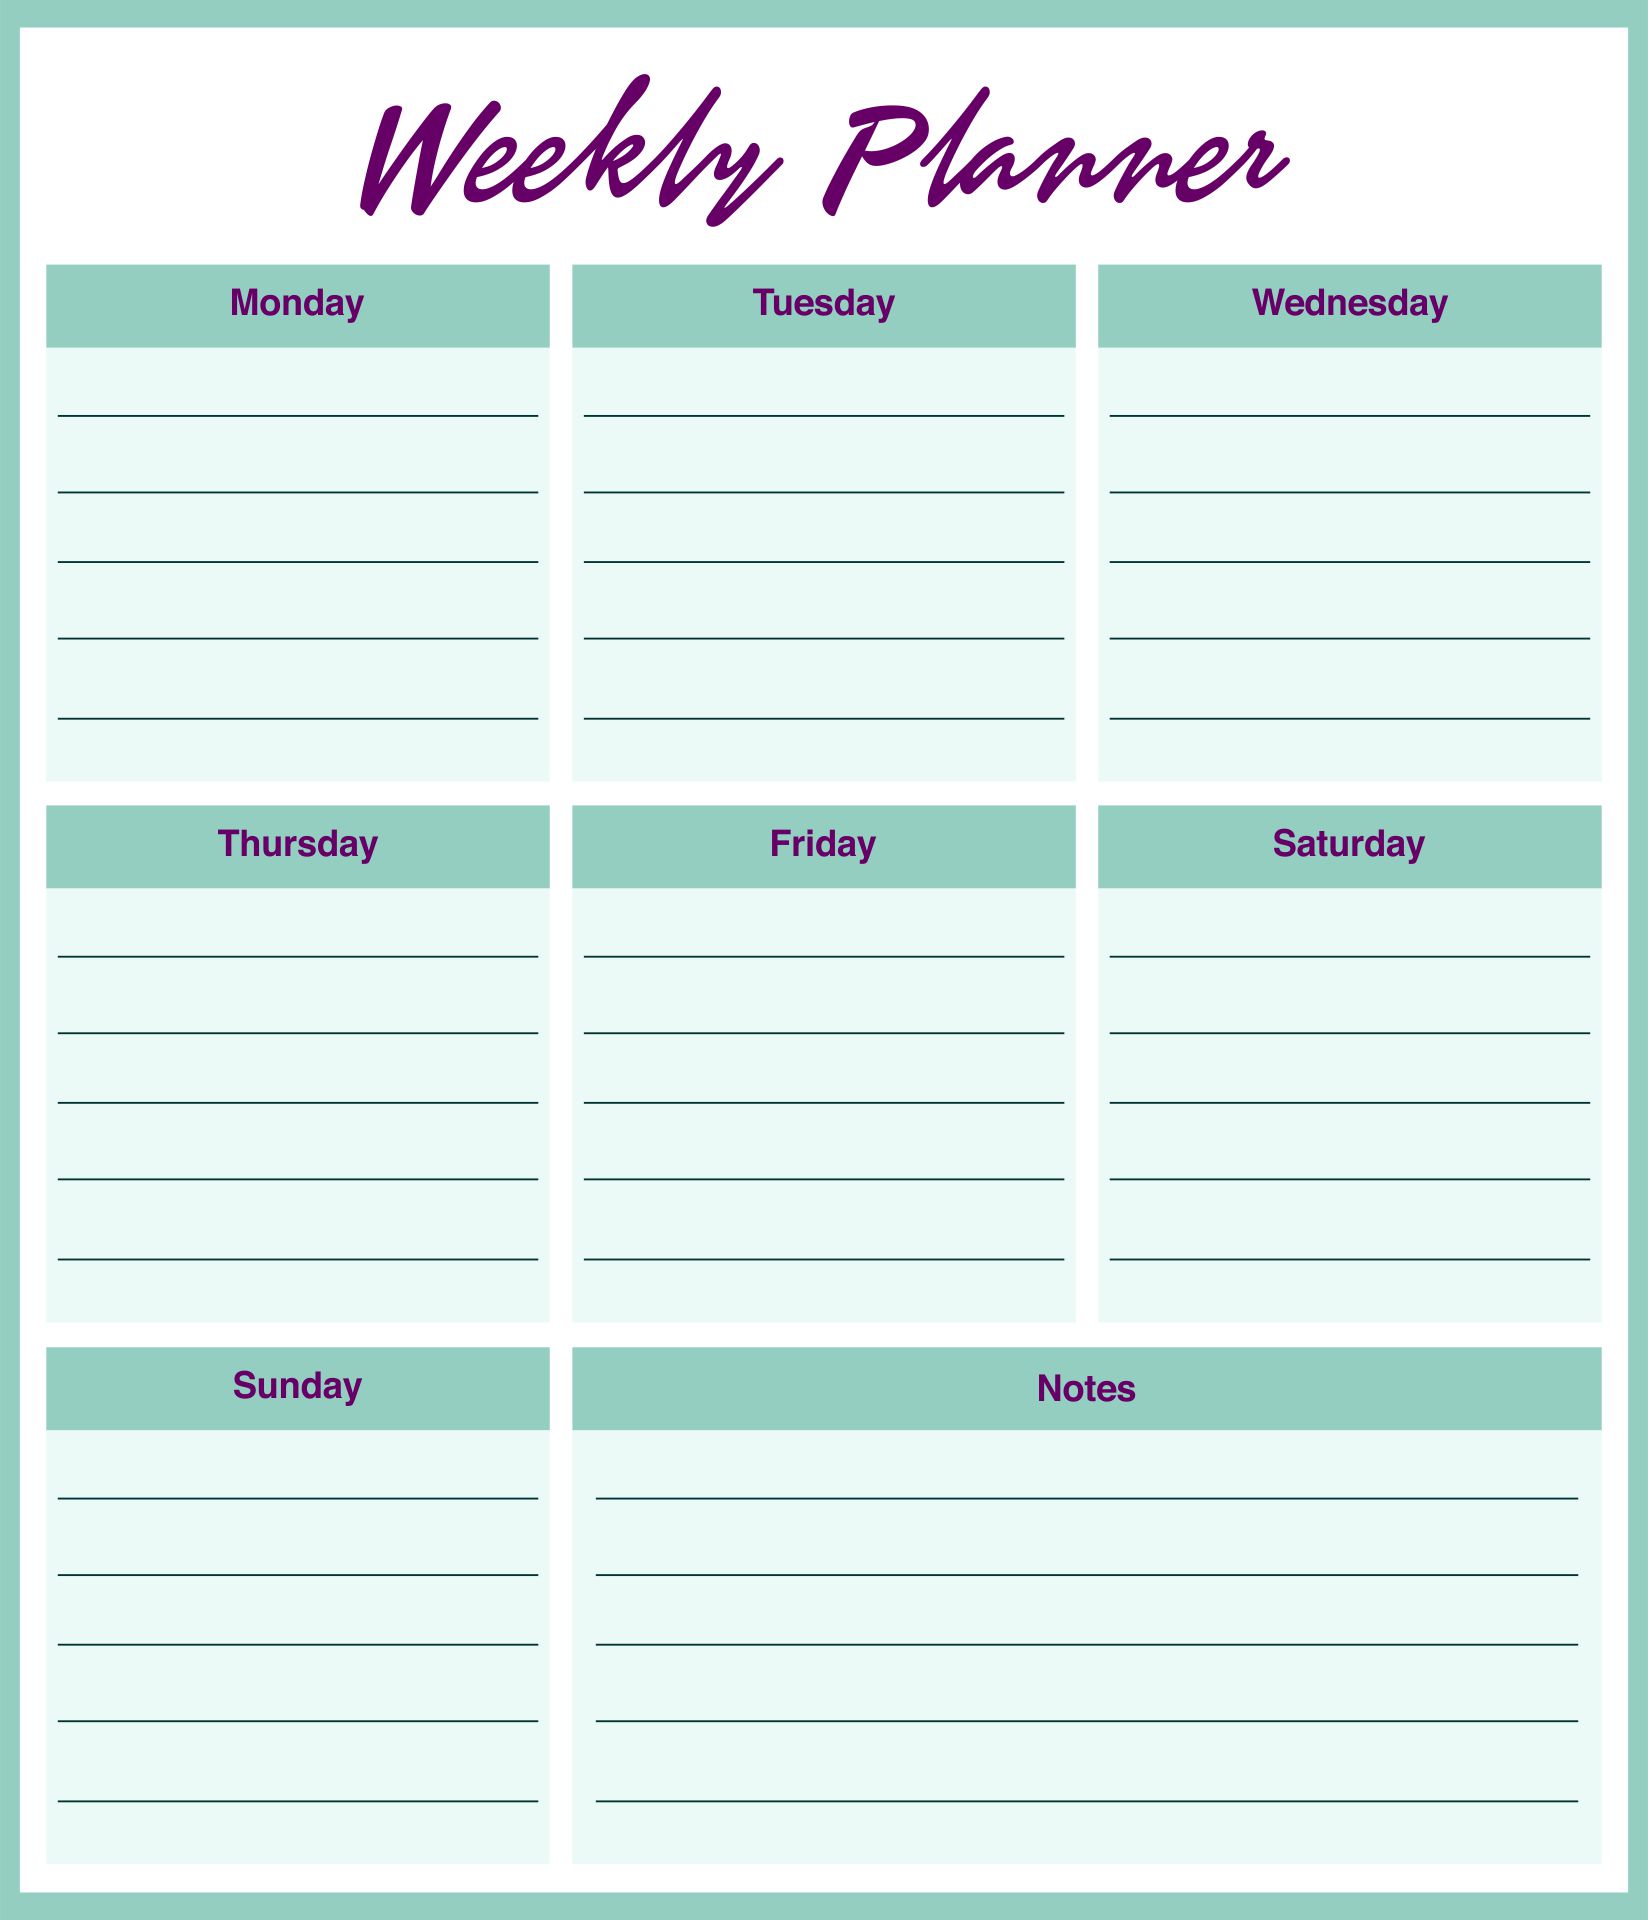 6-best-images-of-student-homework-planners-cute-planners-printable-free-printable-student